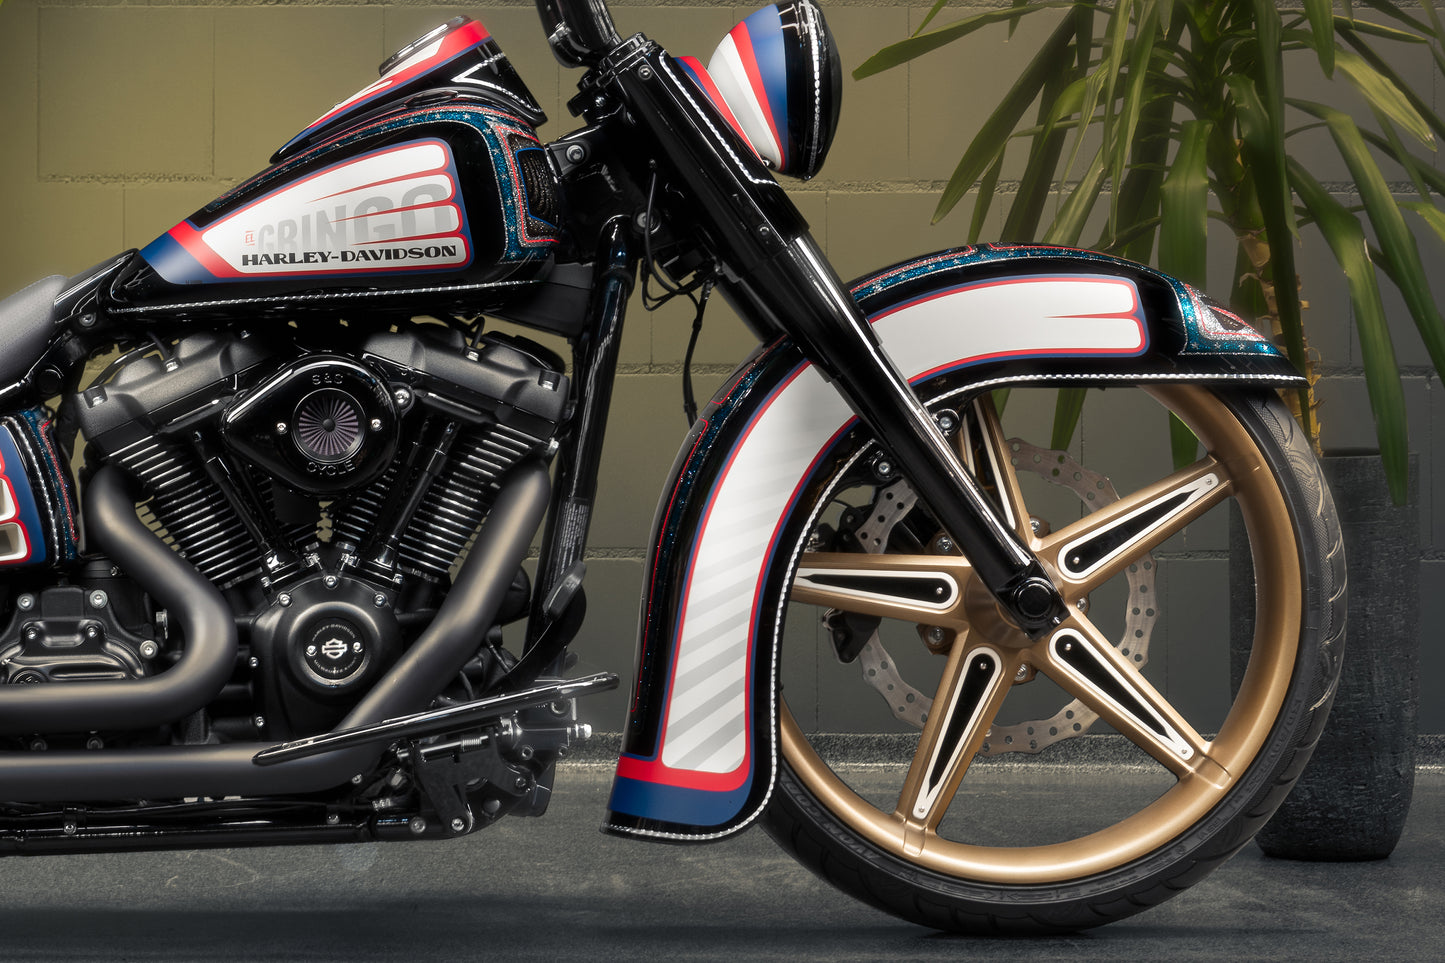 Harley Davidson motorcycle with Killer Custom "Hot rod series" front fender from the side in an industrial environment